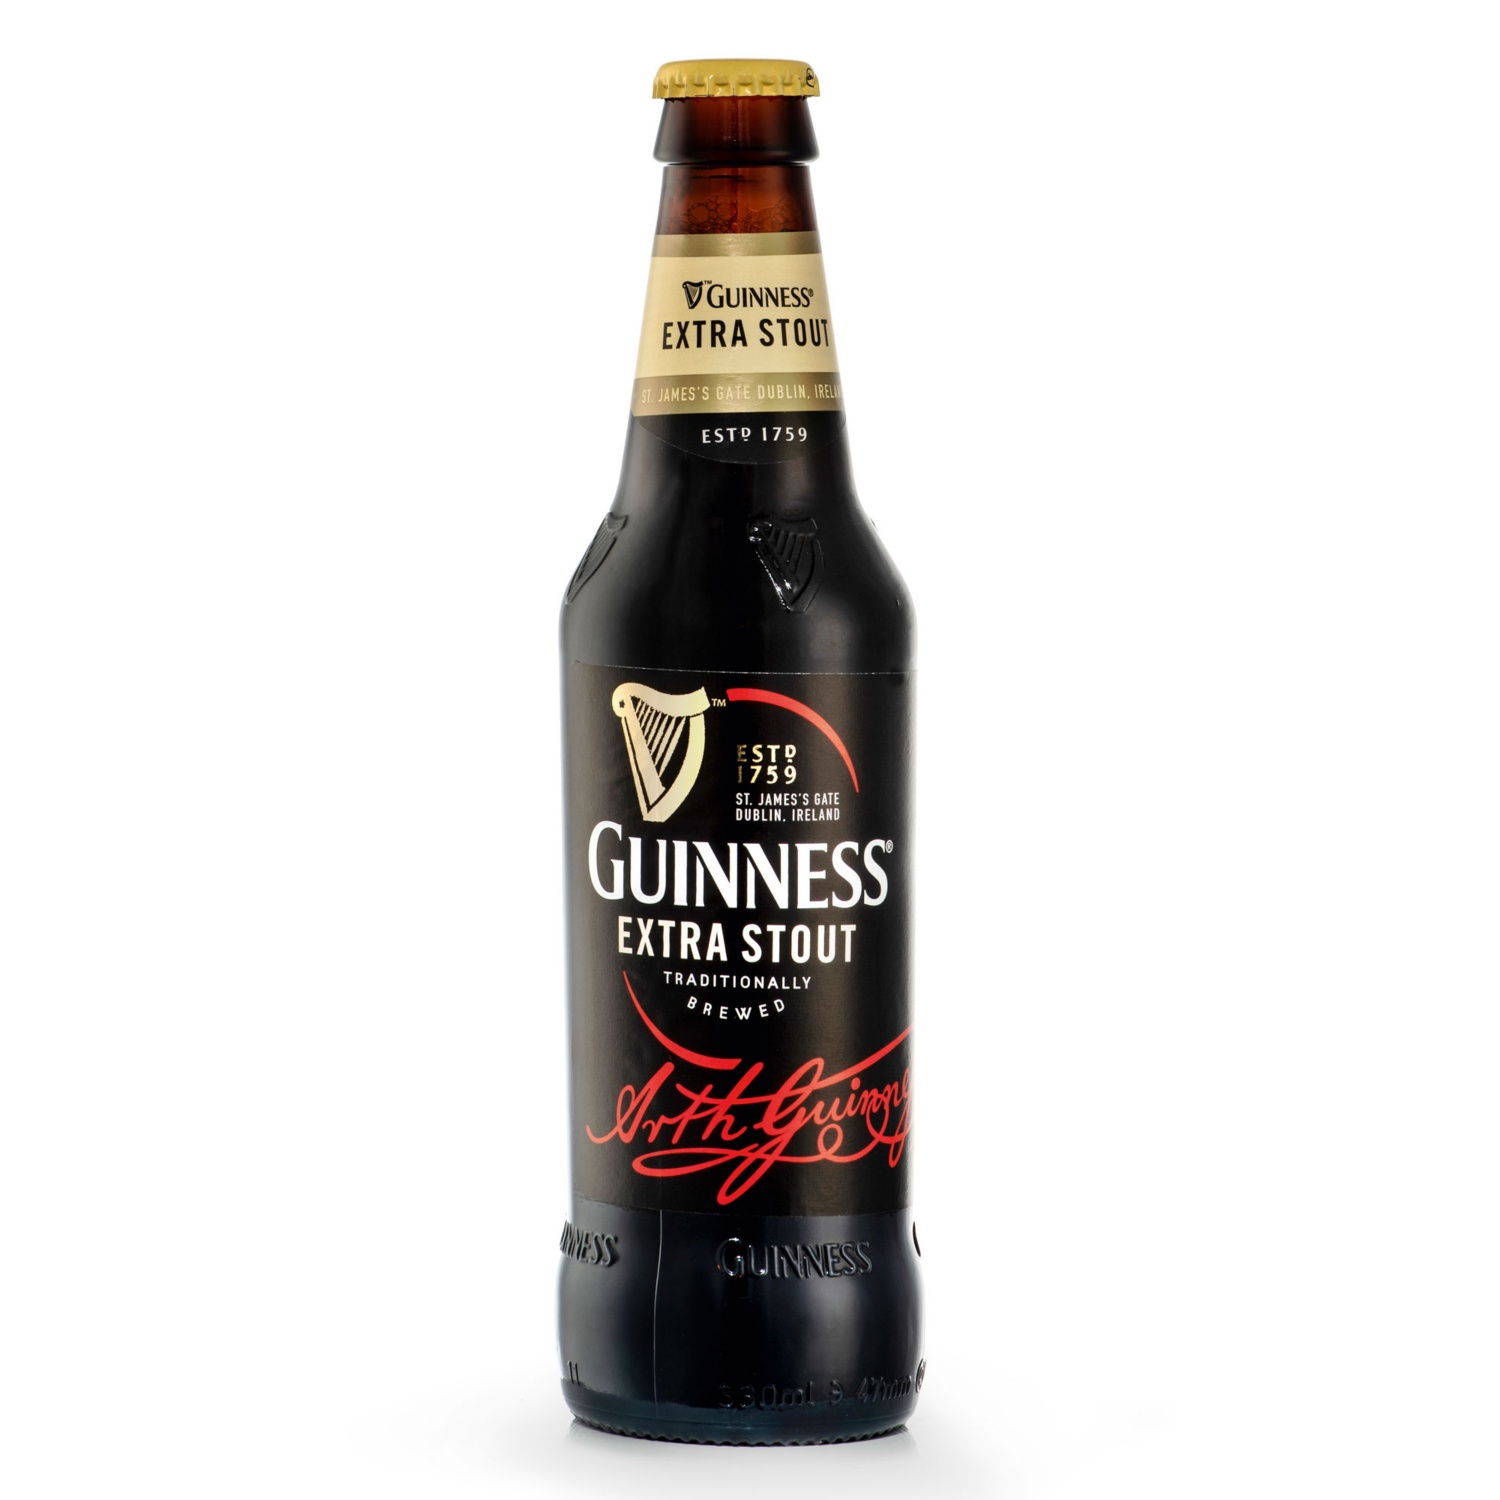 GUINNESS Extra Stout